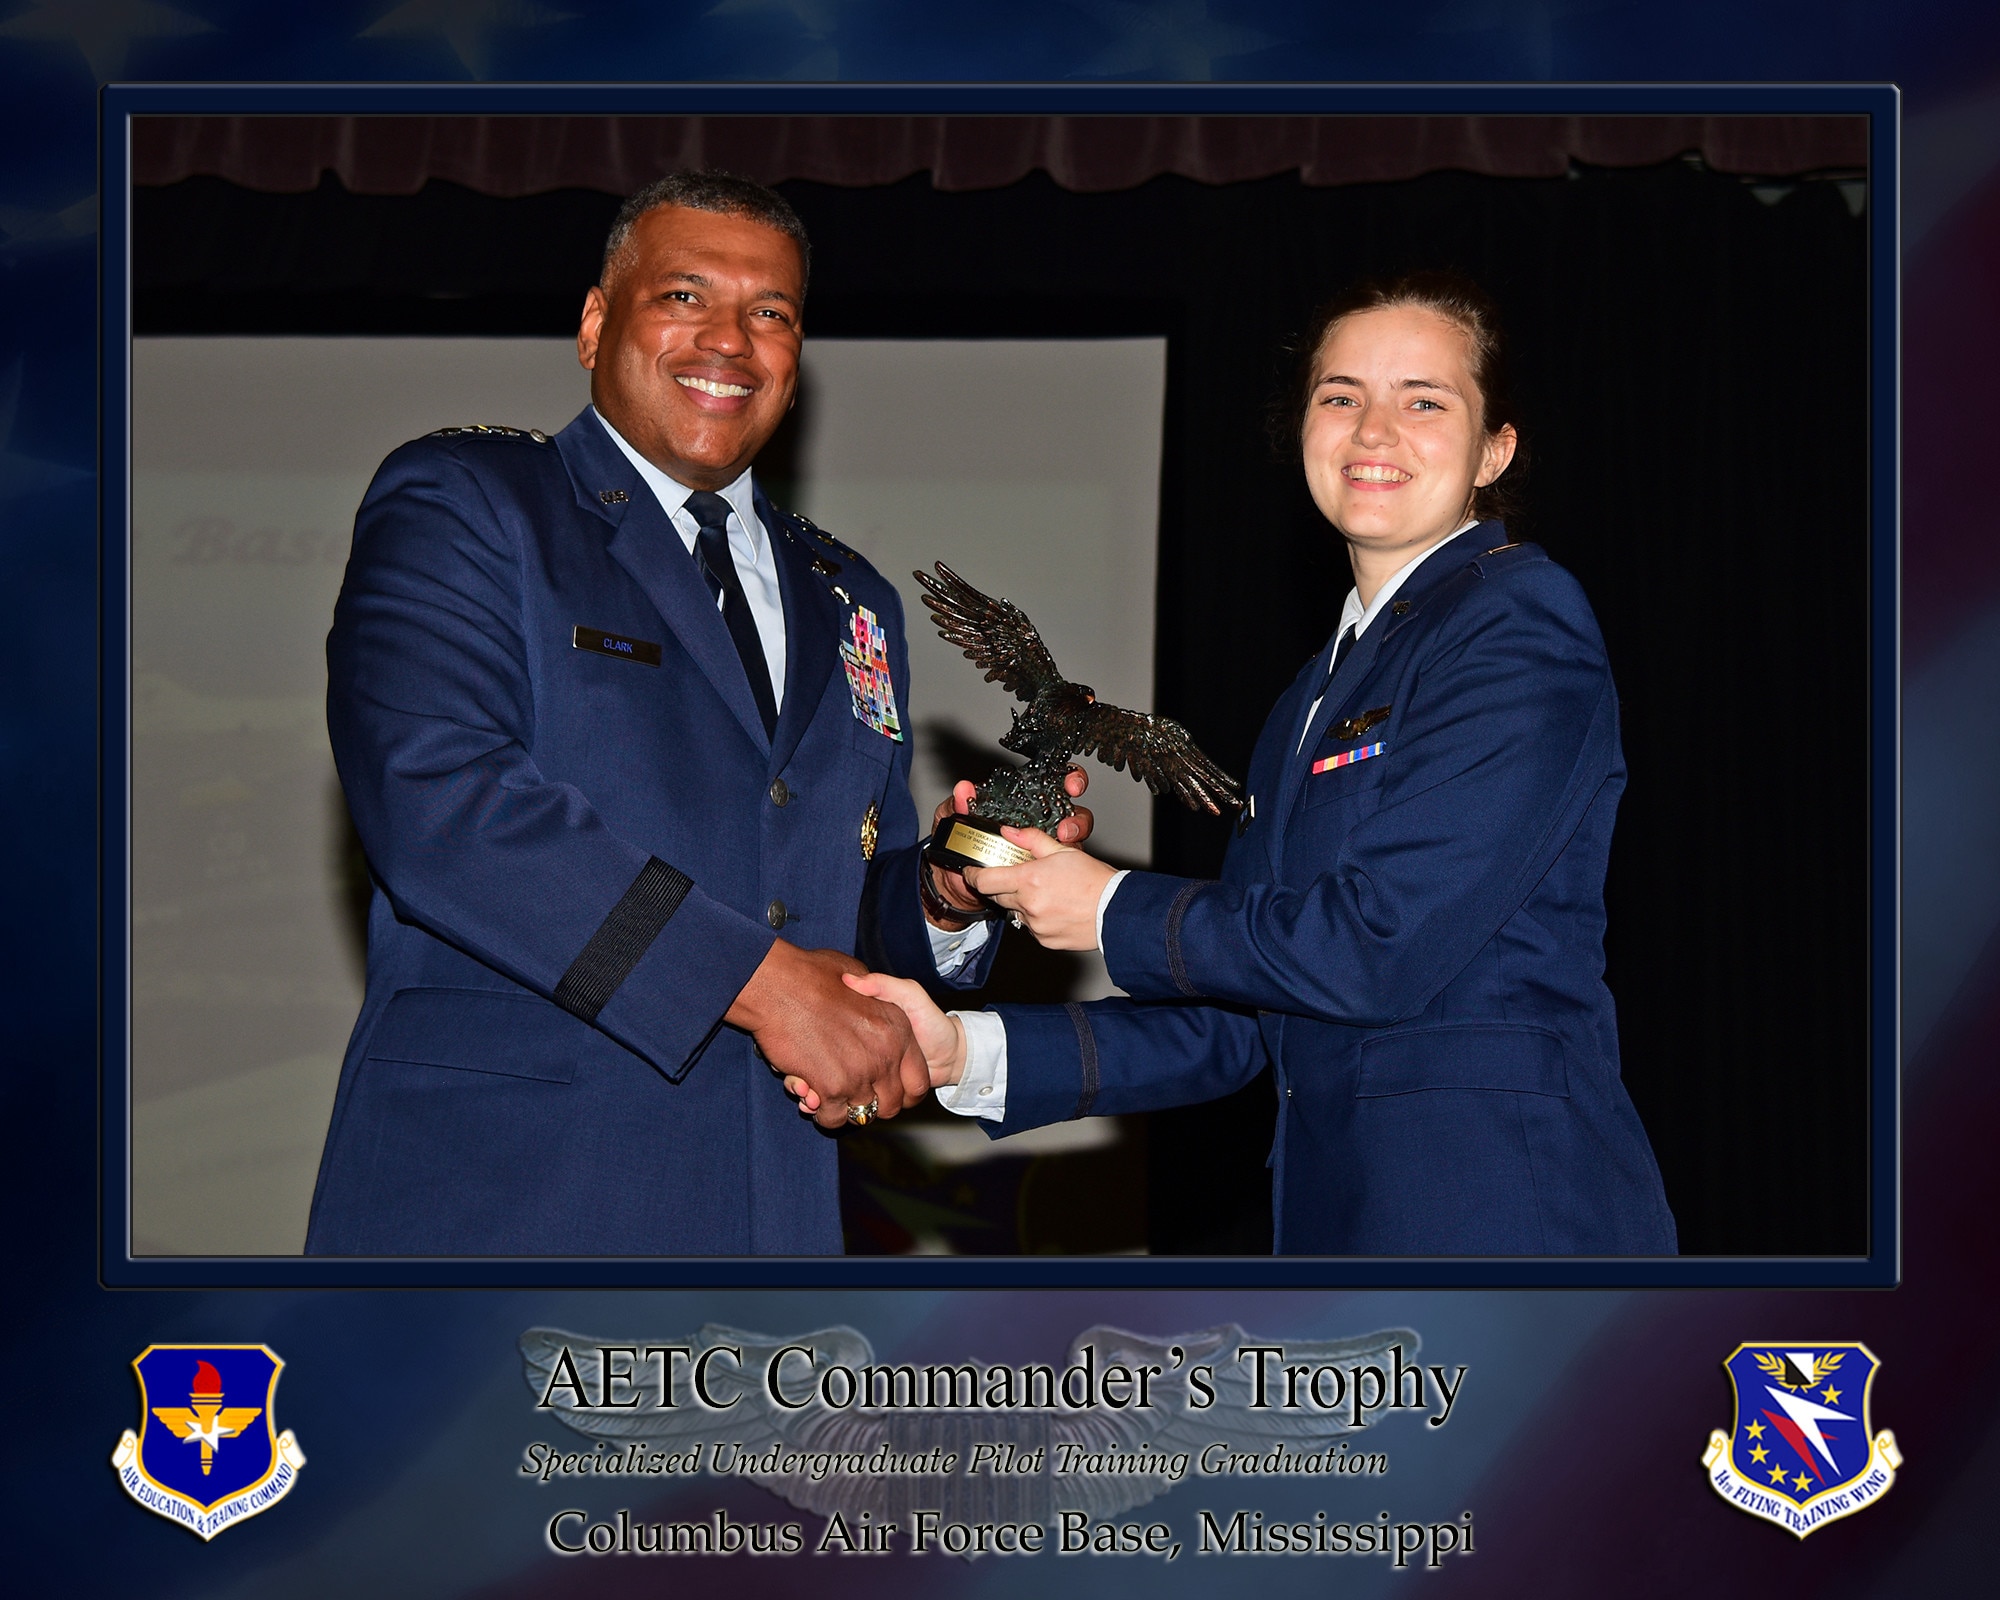 U.S. Air Force Lt. Gen. Richard M. Clark, USAF Academy superintendent, presents 2nd Lt. Riley Simpson, SUPT graduate, with an AETC Commander's Trophy, Mar. 25, 2022 on Columbus Air Force Base, Miss. Simpson was one of three recipients of the award for being the most outstanding students overall in their classes. (U.S. Air Force photo by Melissa Duncan-Doublin)